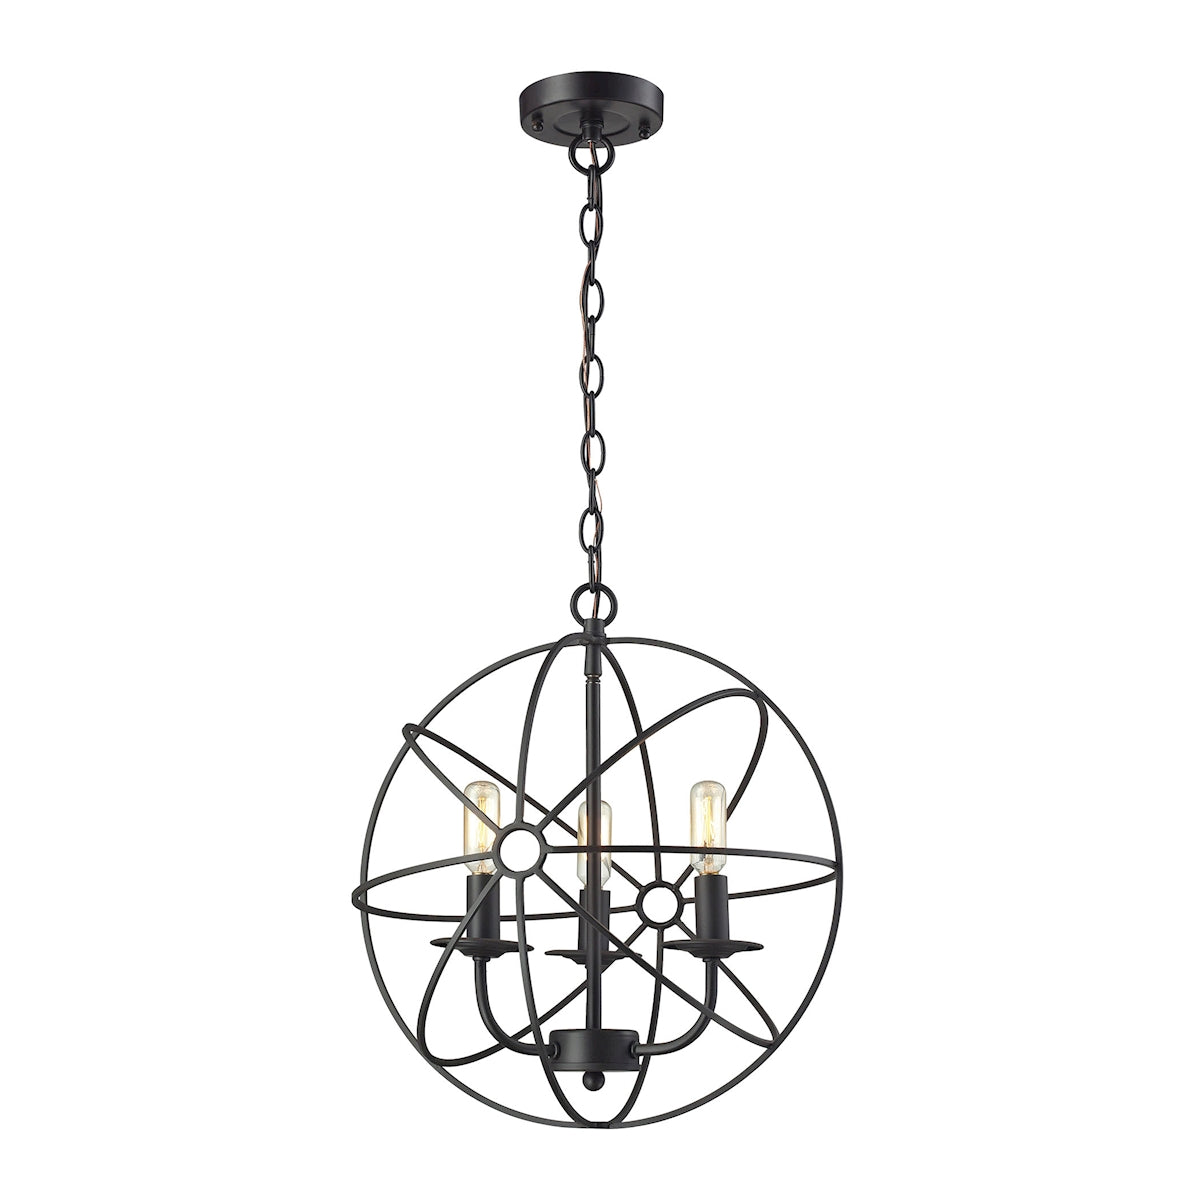 ELK Lighting 14243/3 Yardley 3-Light Chandelier in Oil Rubbed Bronze with Wire Cage